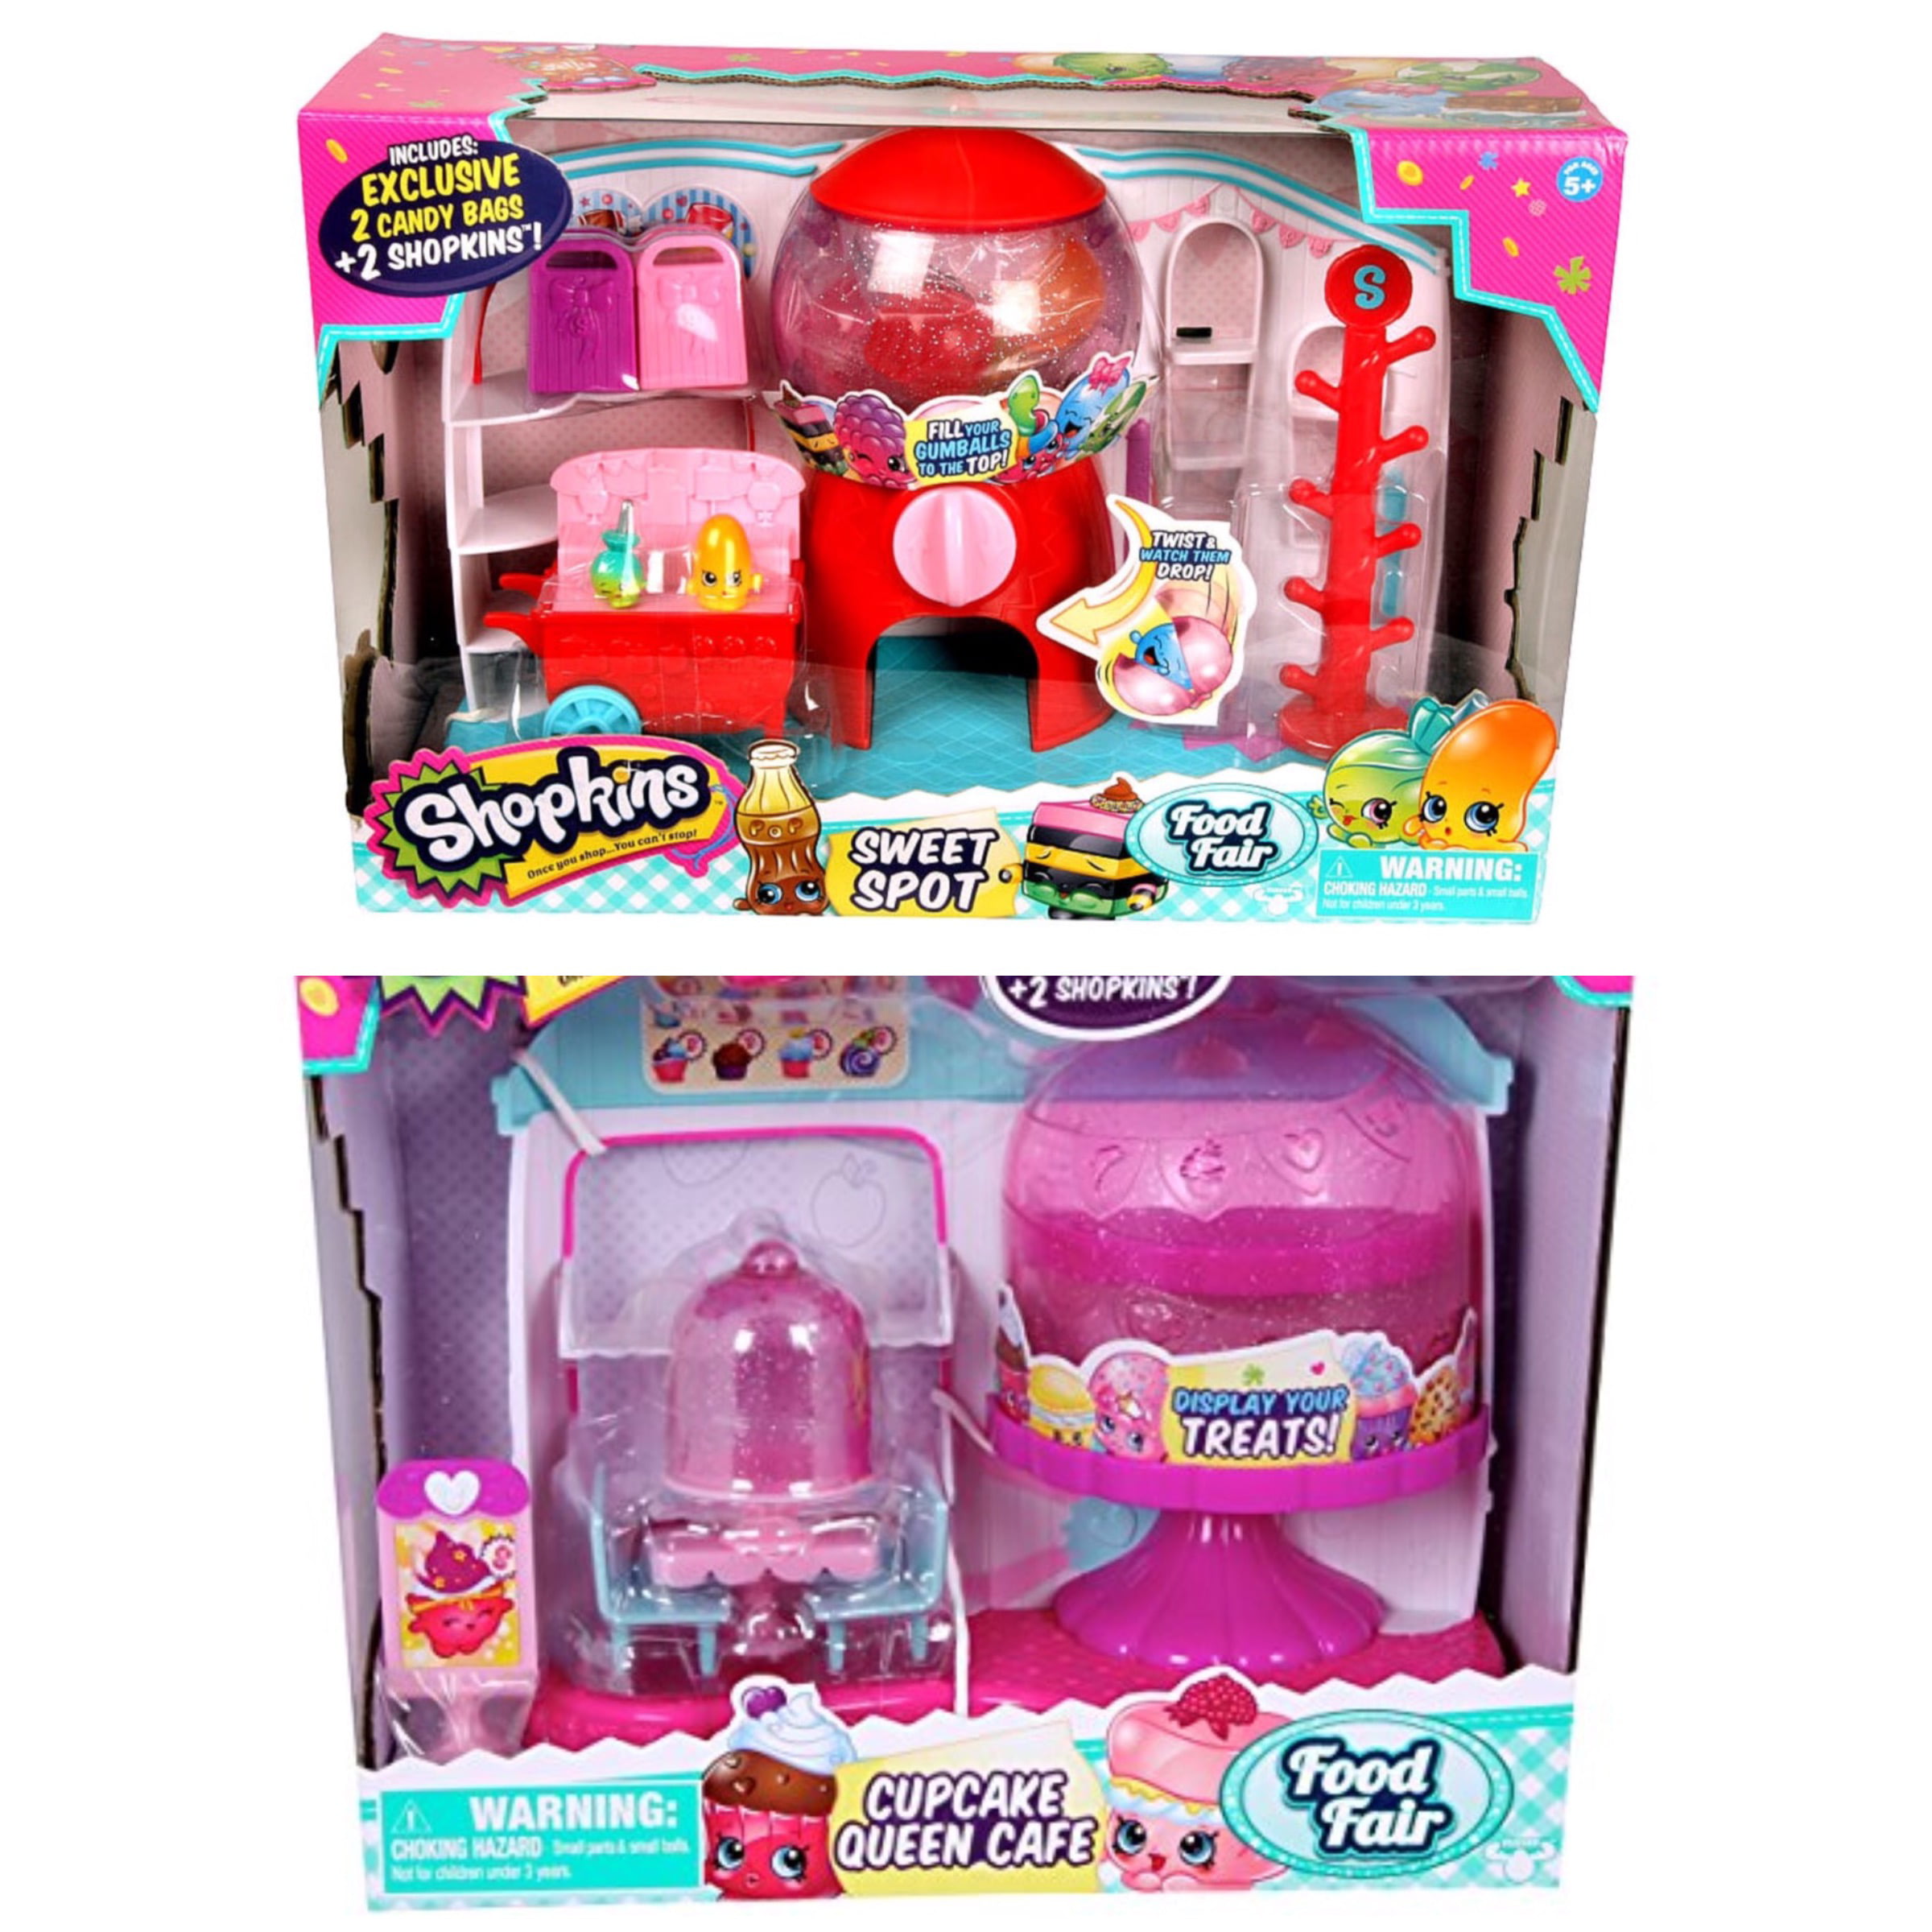 New Shopkins Cupcake Queen Cafe Playset Cake Boxes /& Figures Food Fair Official